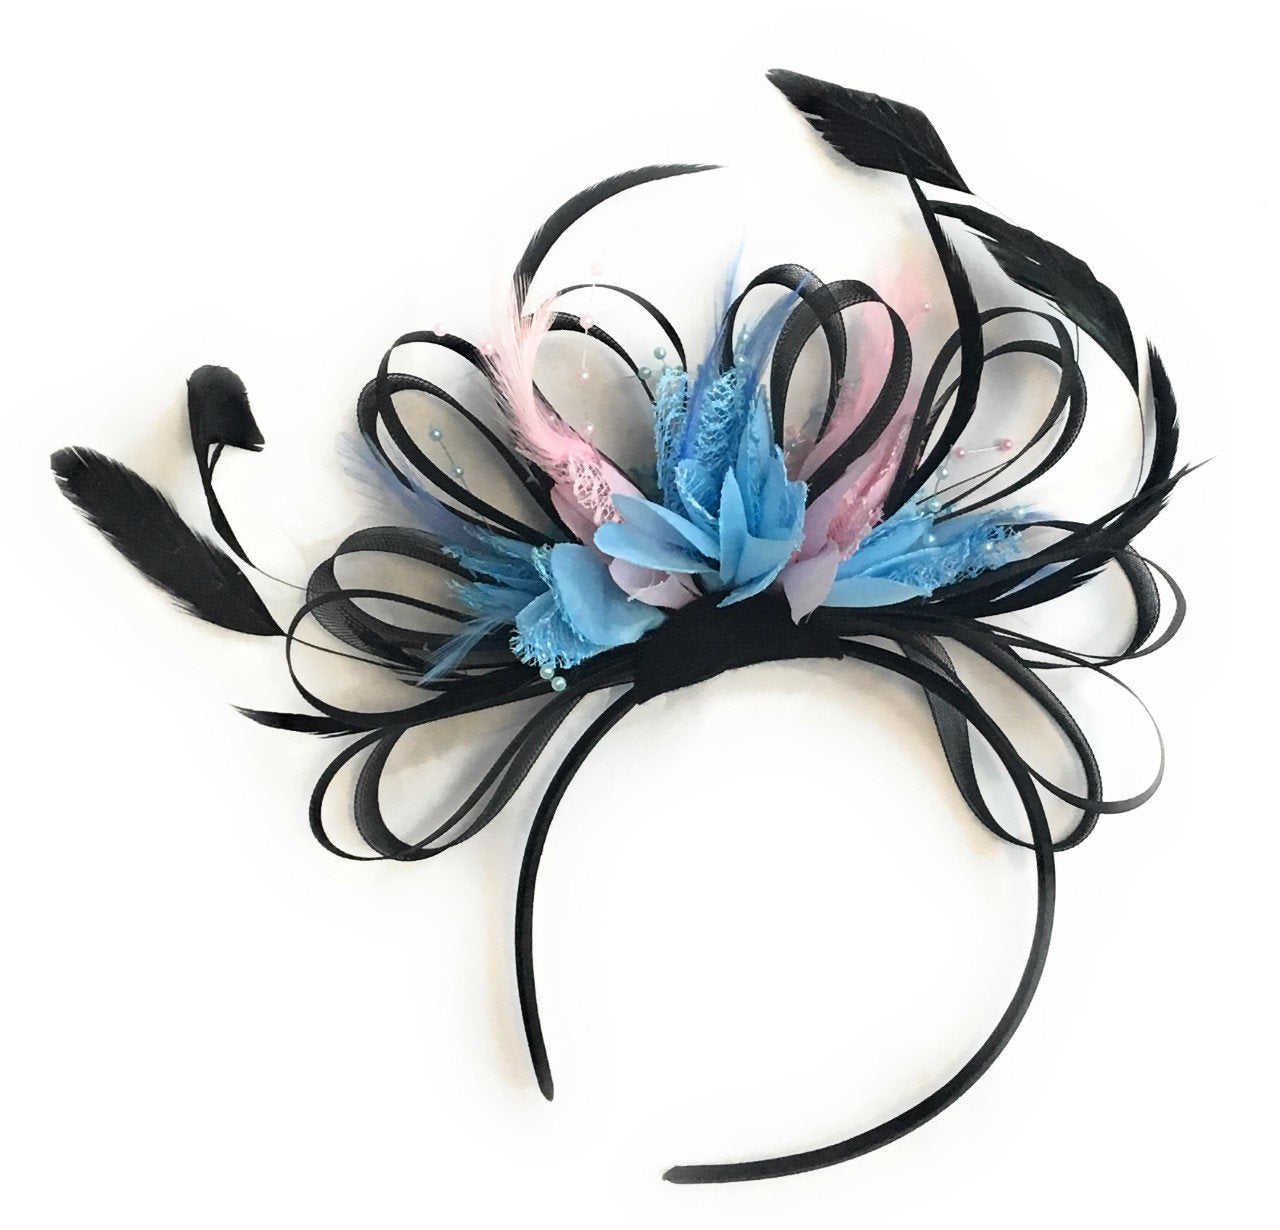 Caprilite Black, Baby Blue and Baby Pink Feathers Fascinator Headband Wedding Ascot Derby